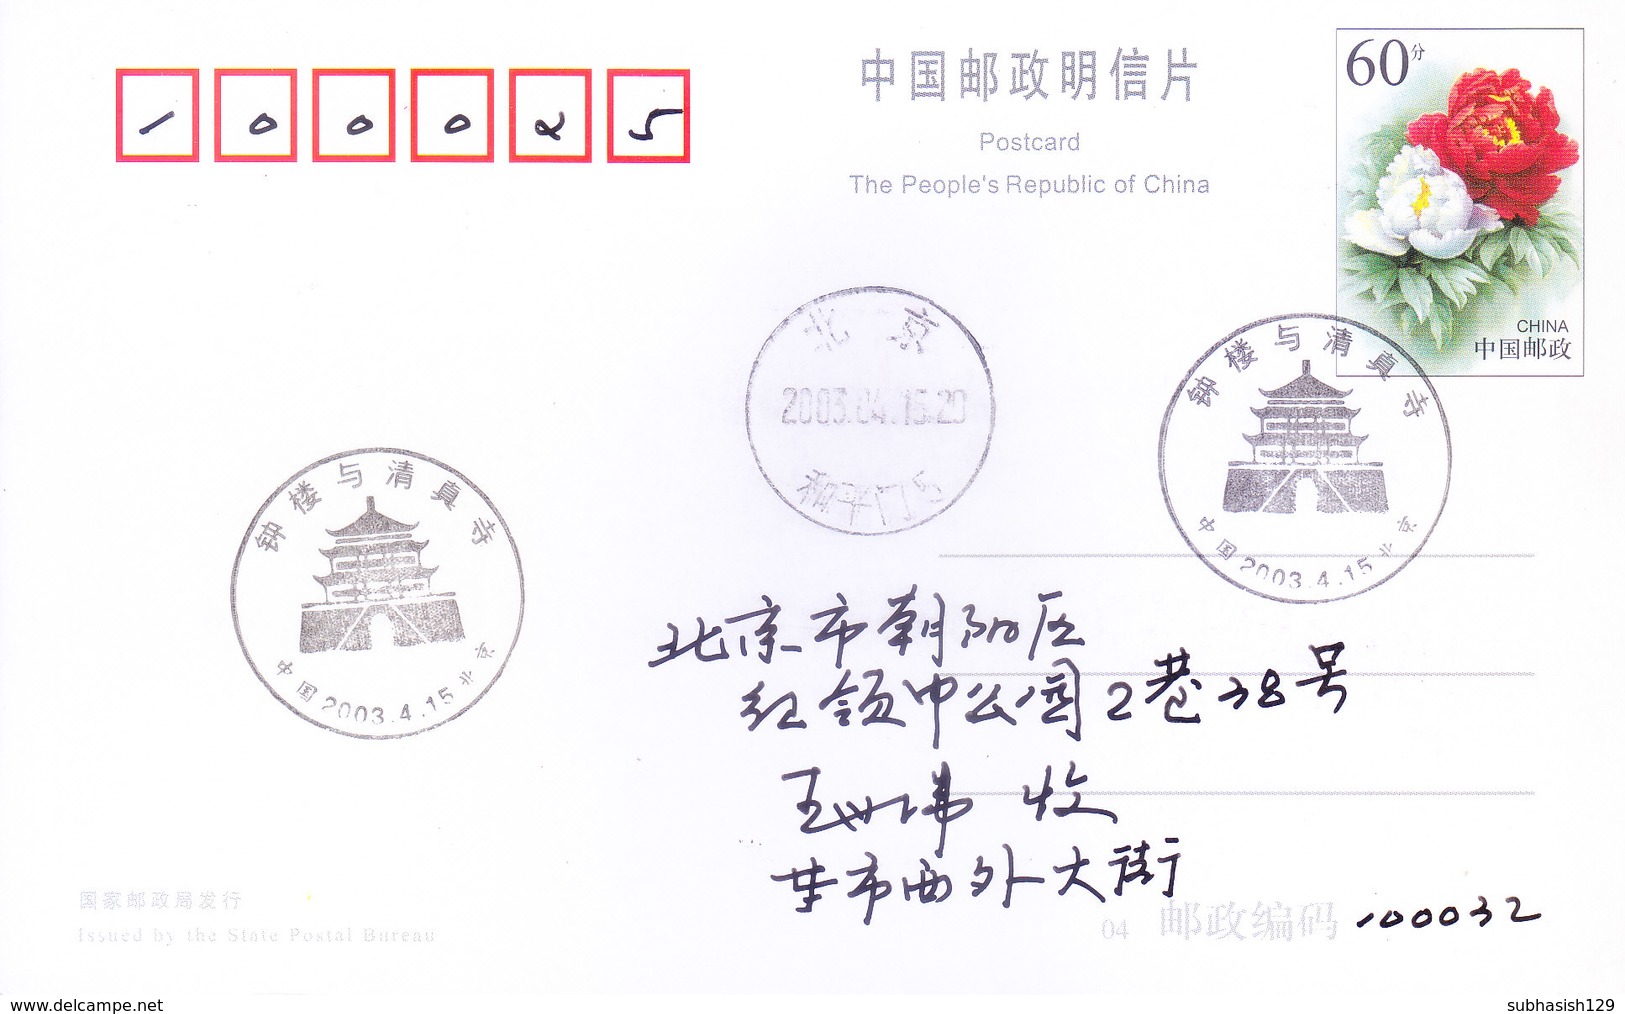 CHINA OFFICIAL POST CARD COMMERCIALLY USED 2003 - SPECIAL CANCELLATION - Covers & Documents